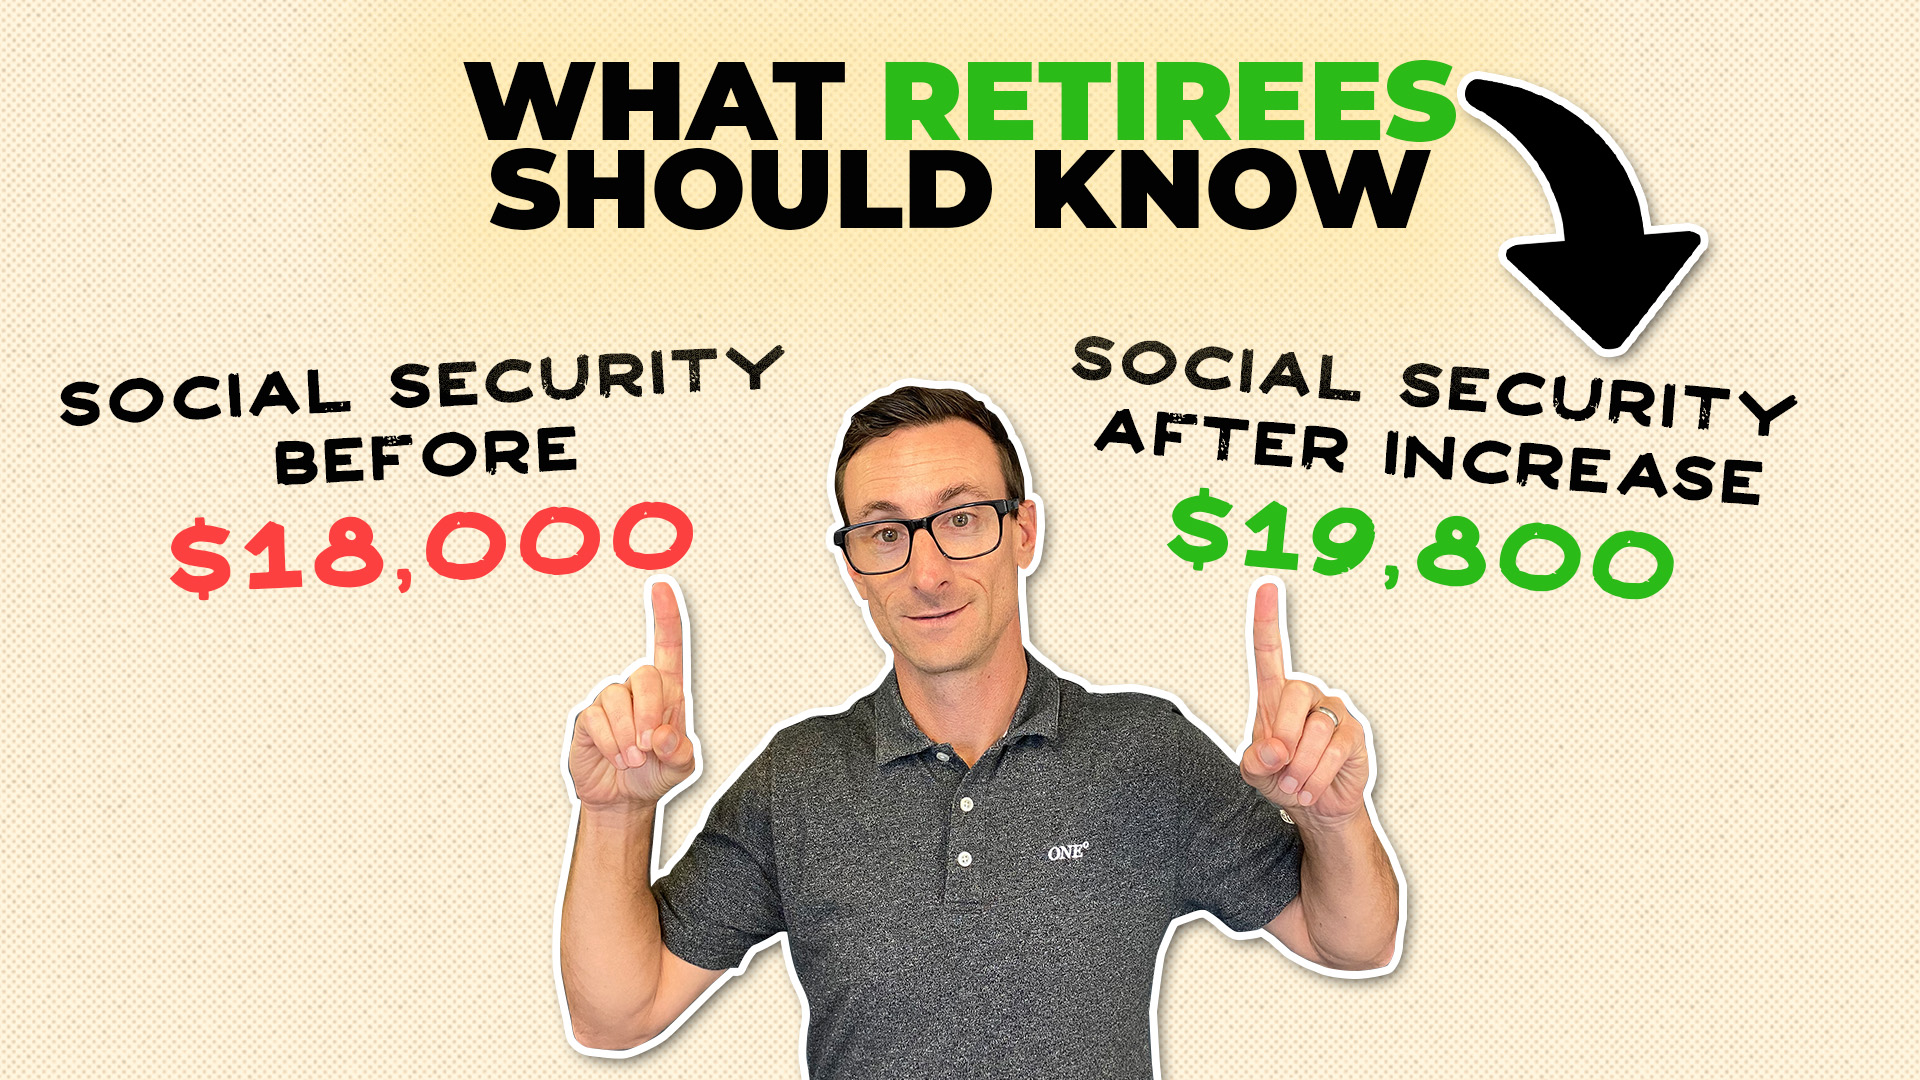 Social Security Increase for 2023 (What Retirees Should Know) One